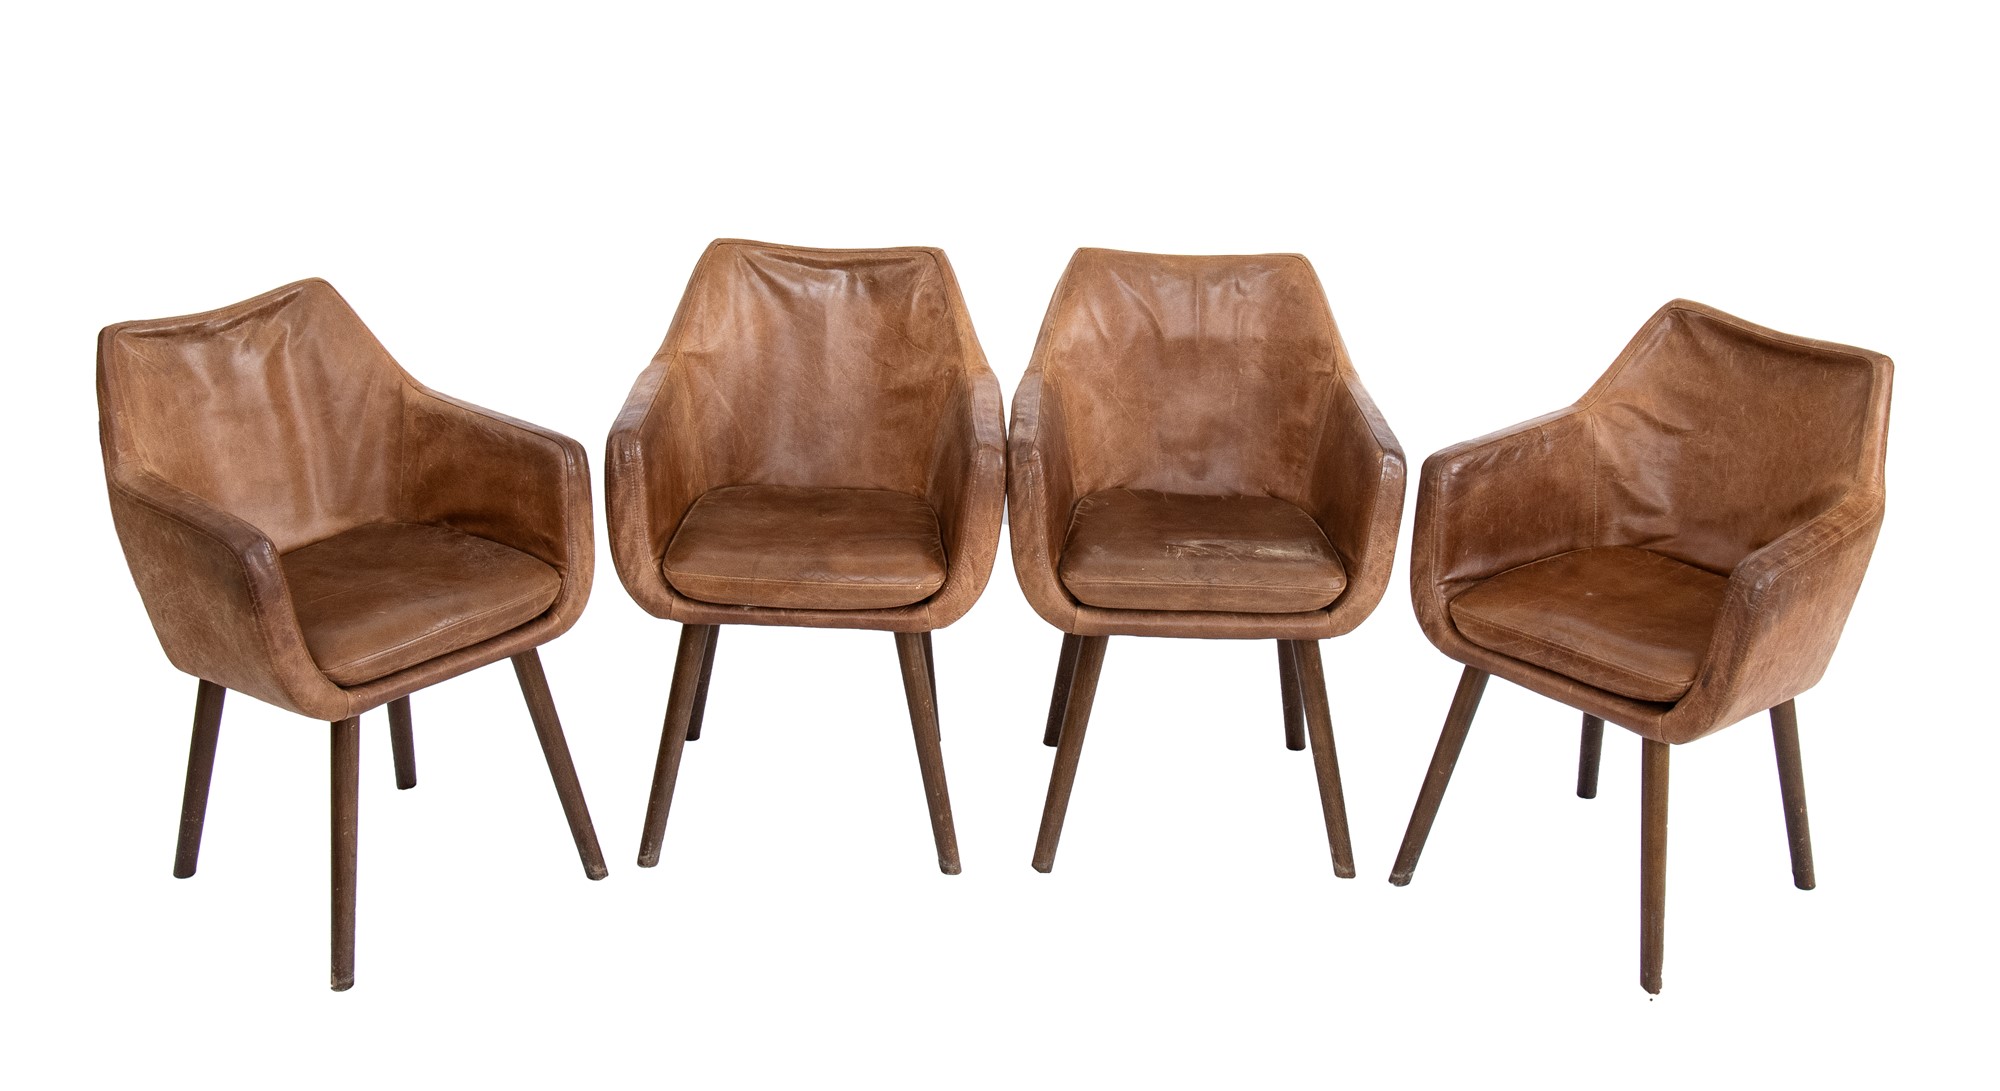 4 leather chairs. 20th century English manufacture - Image 4 of 19